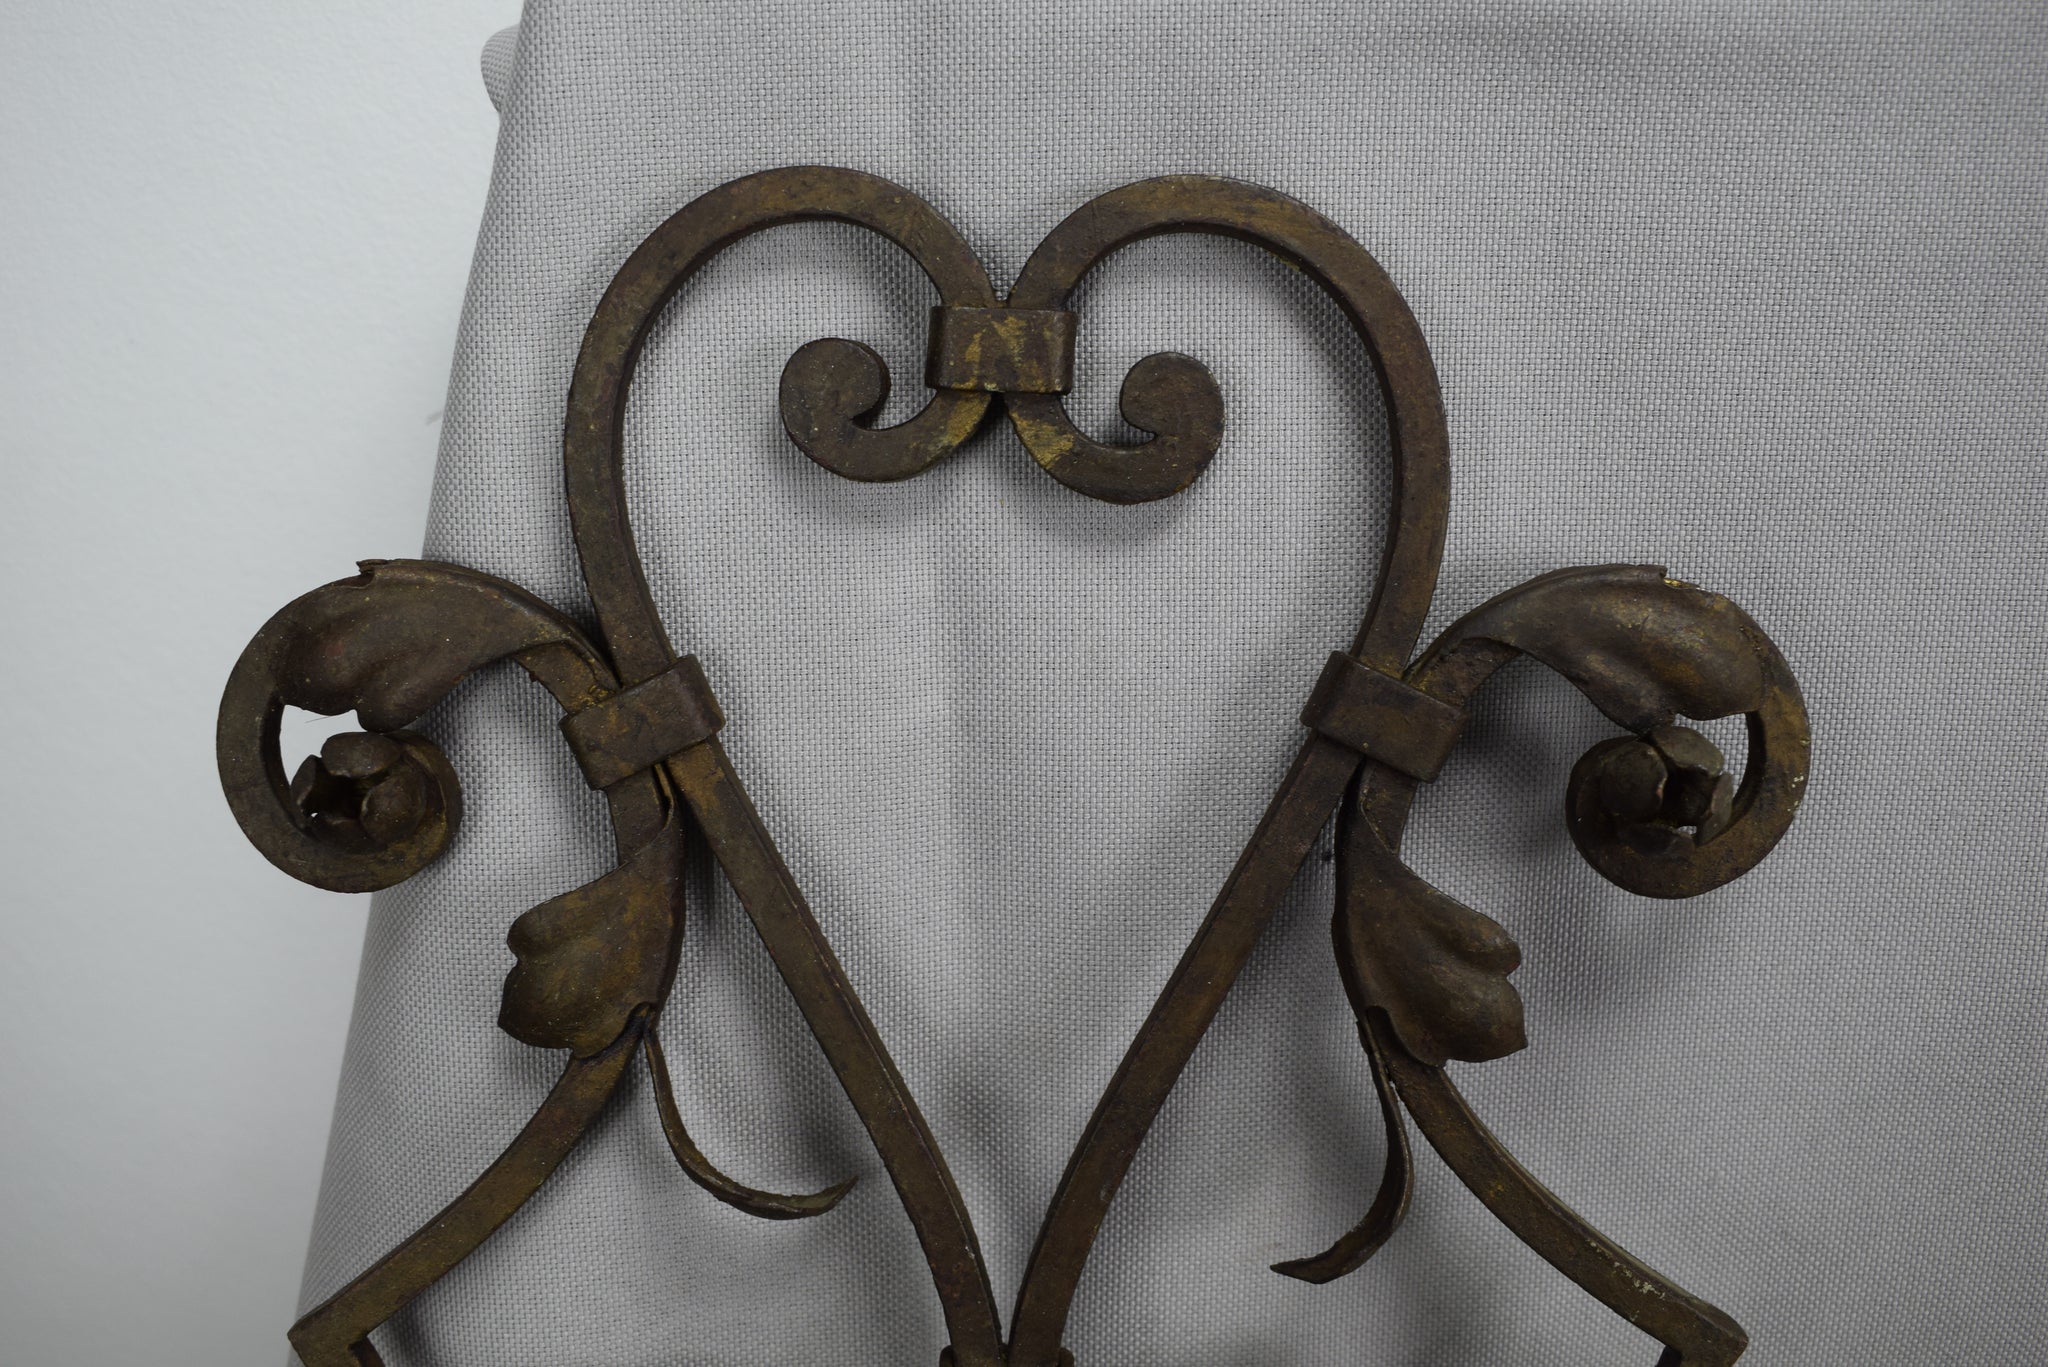 Wrought Iron Wall Sconces - Charmantiques